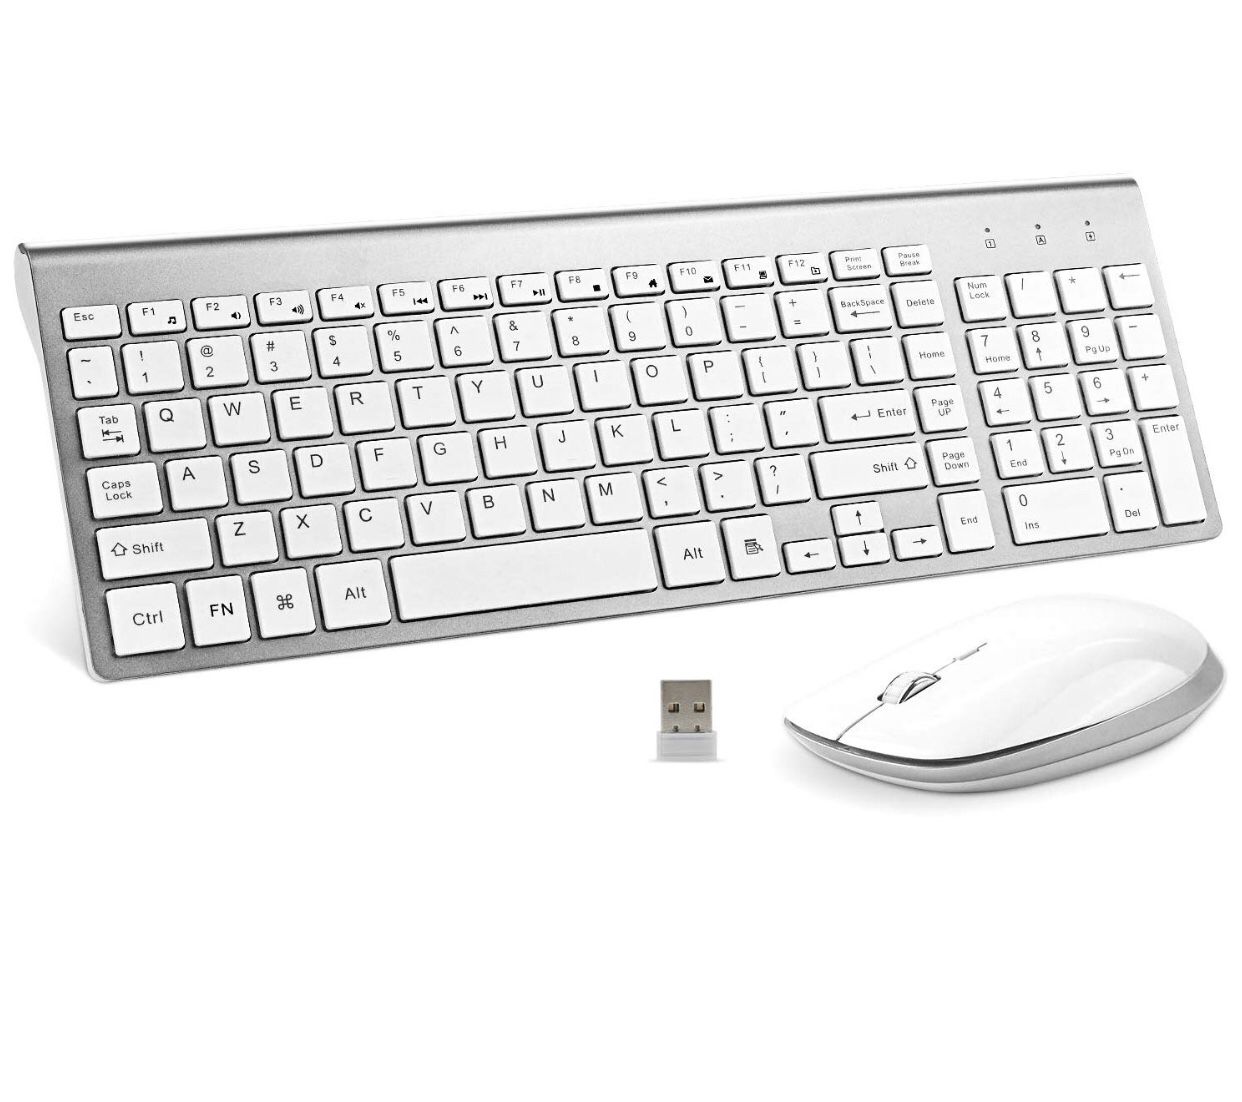 Wireless Keyboard and Mouse, FENIFOX USB Full Size Quiet Compact Compatible with iMac Mac PC Laptop Tablet Computer Windows (Silver White)